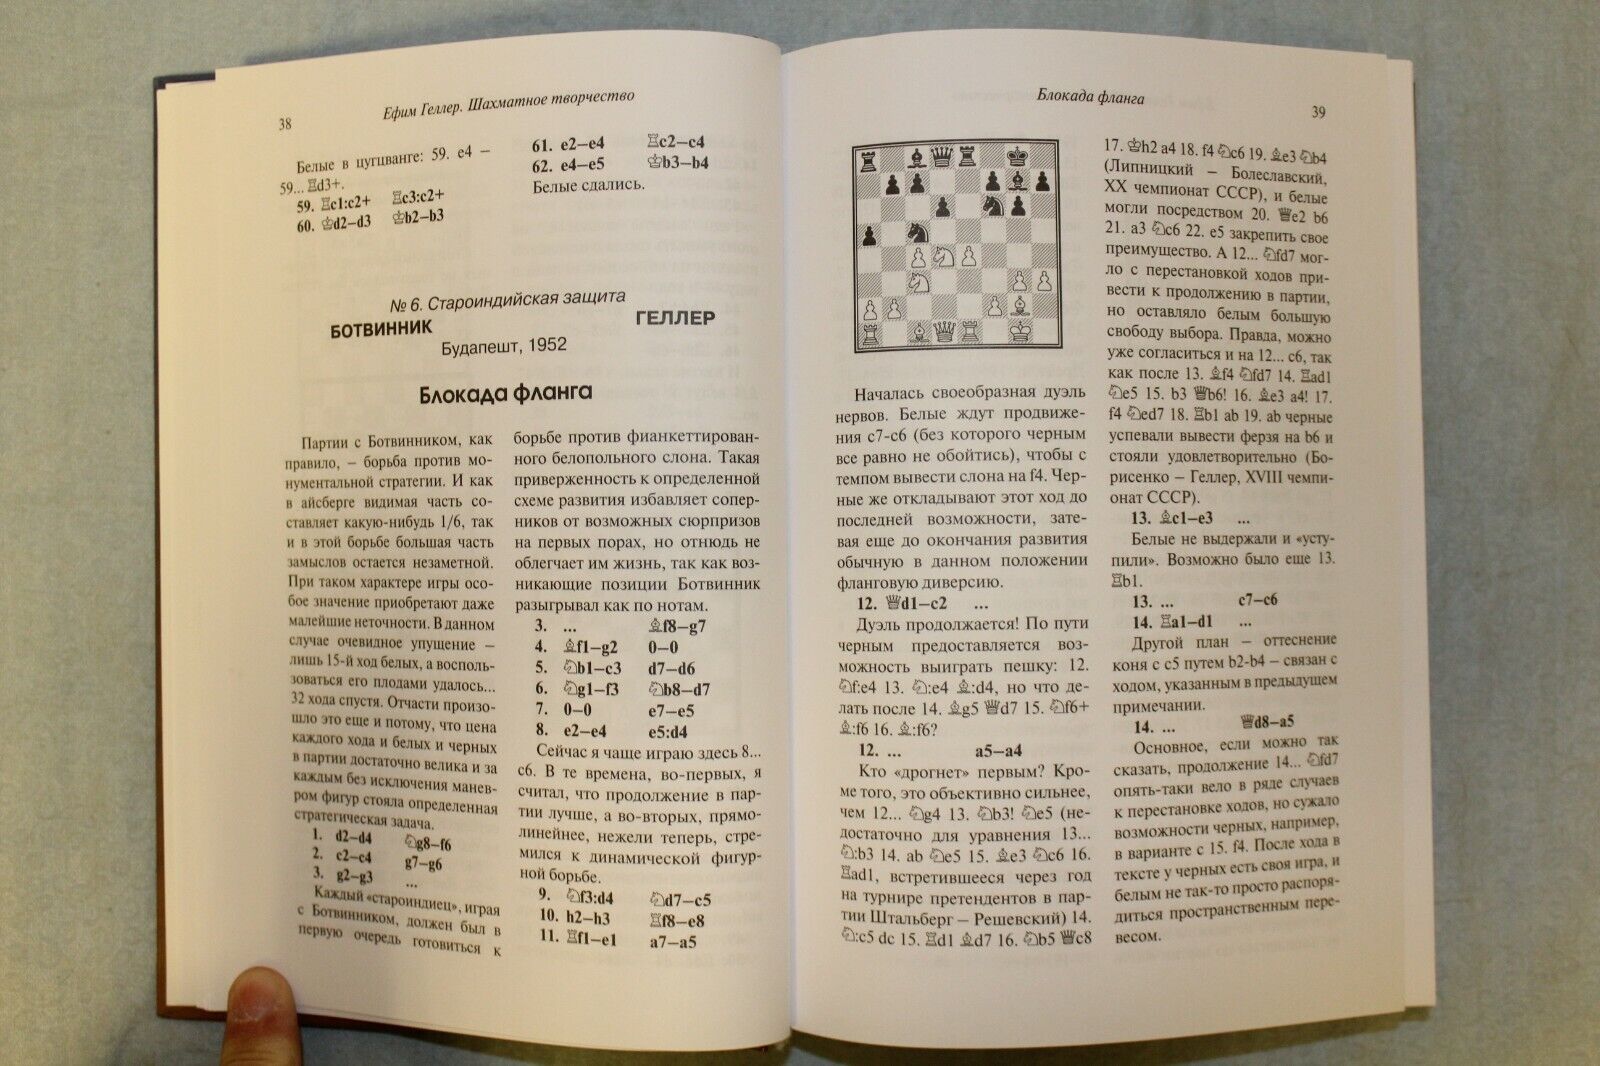 11148.Chess Creativity. Yefim Geller. Complete games collection with comments. 2019